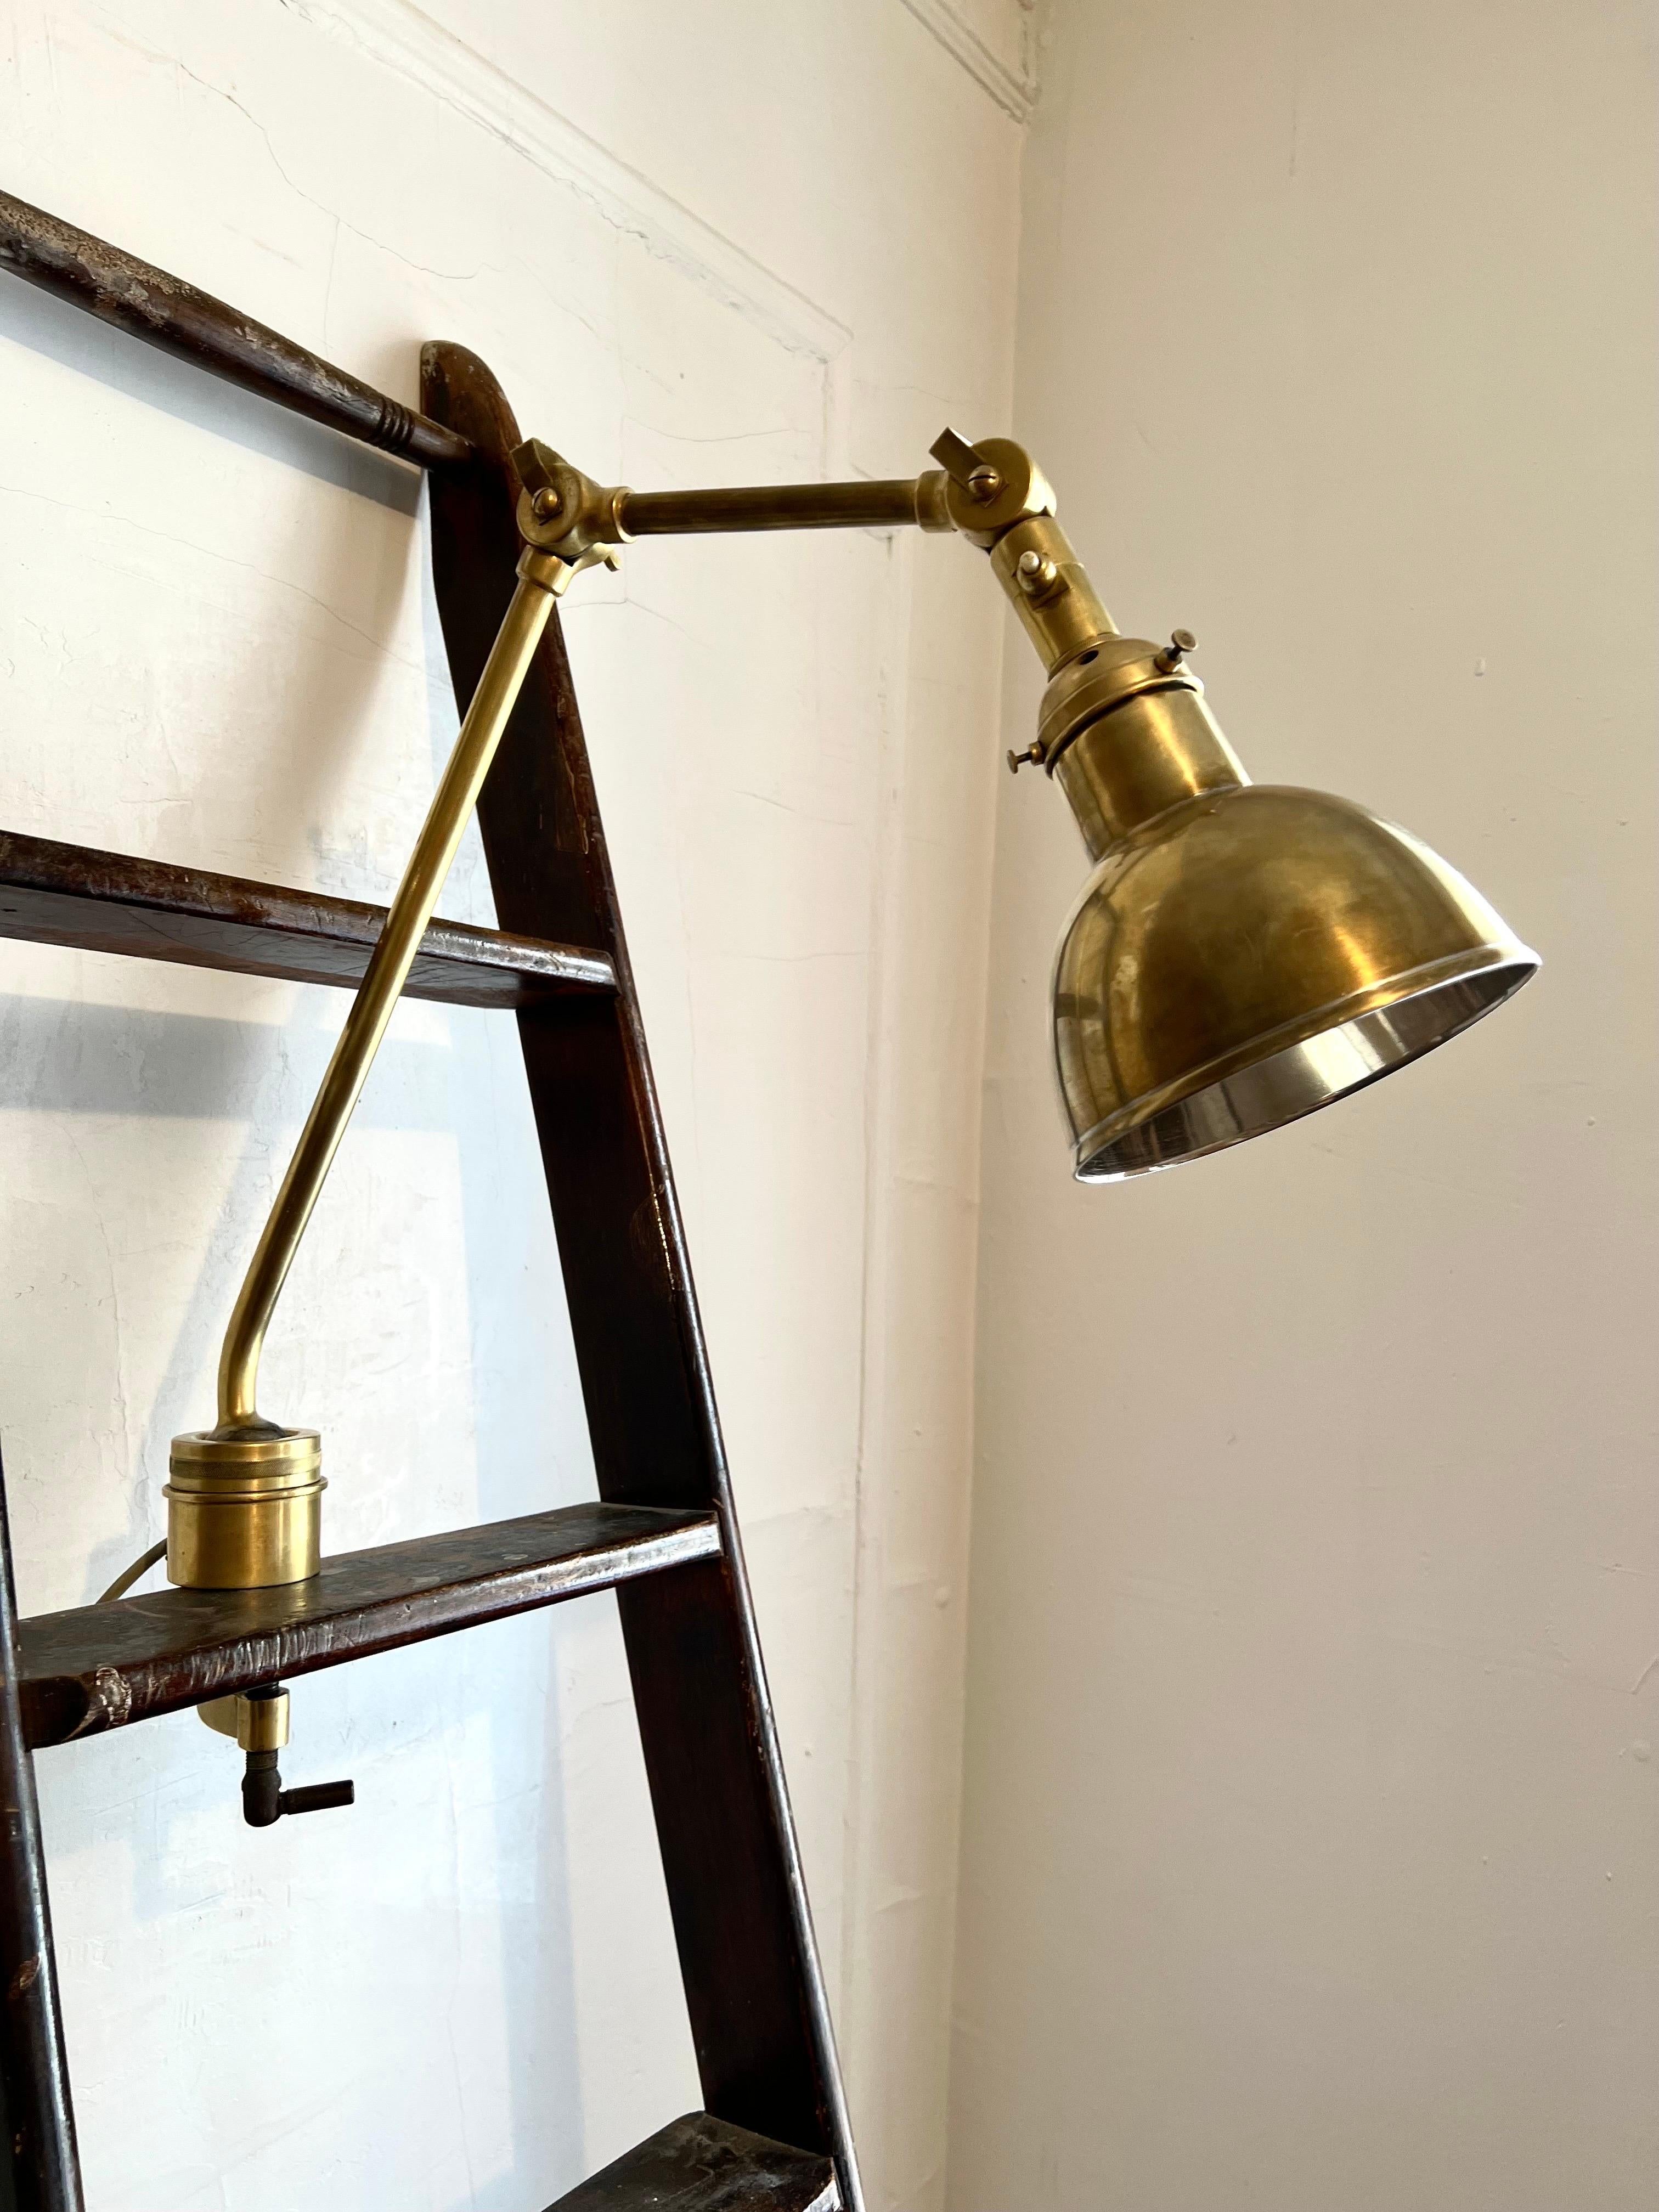 Swedish Mid-Century Modern Marine Industrial clamp lamp in solid brass with a vintage hand made ladder forming a floor lamp. The Swedish clamp lamp and ladder were salvaged from a Swedish luxury vessel circa 1950.